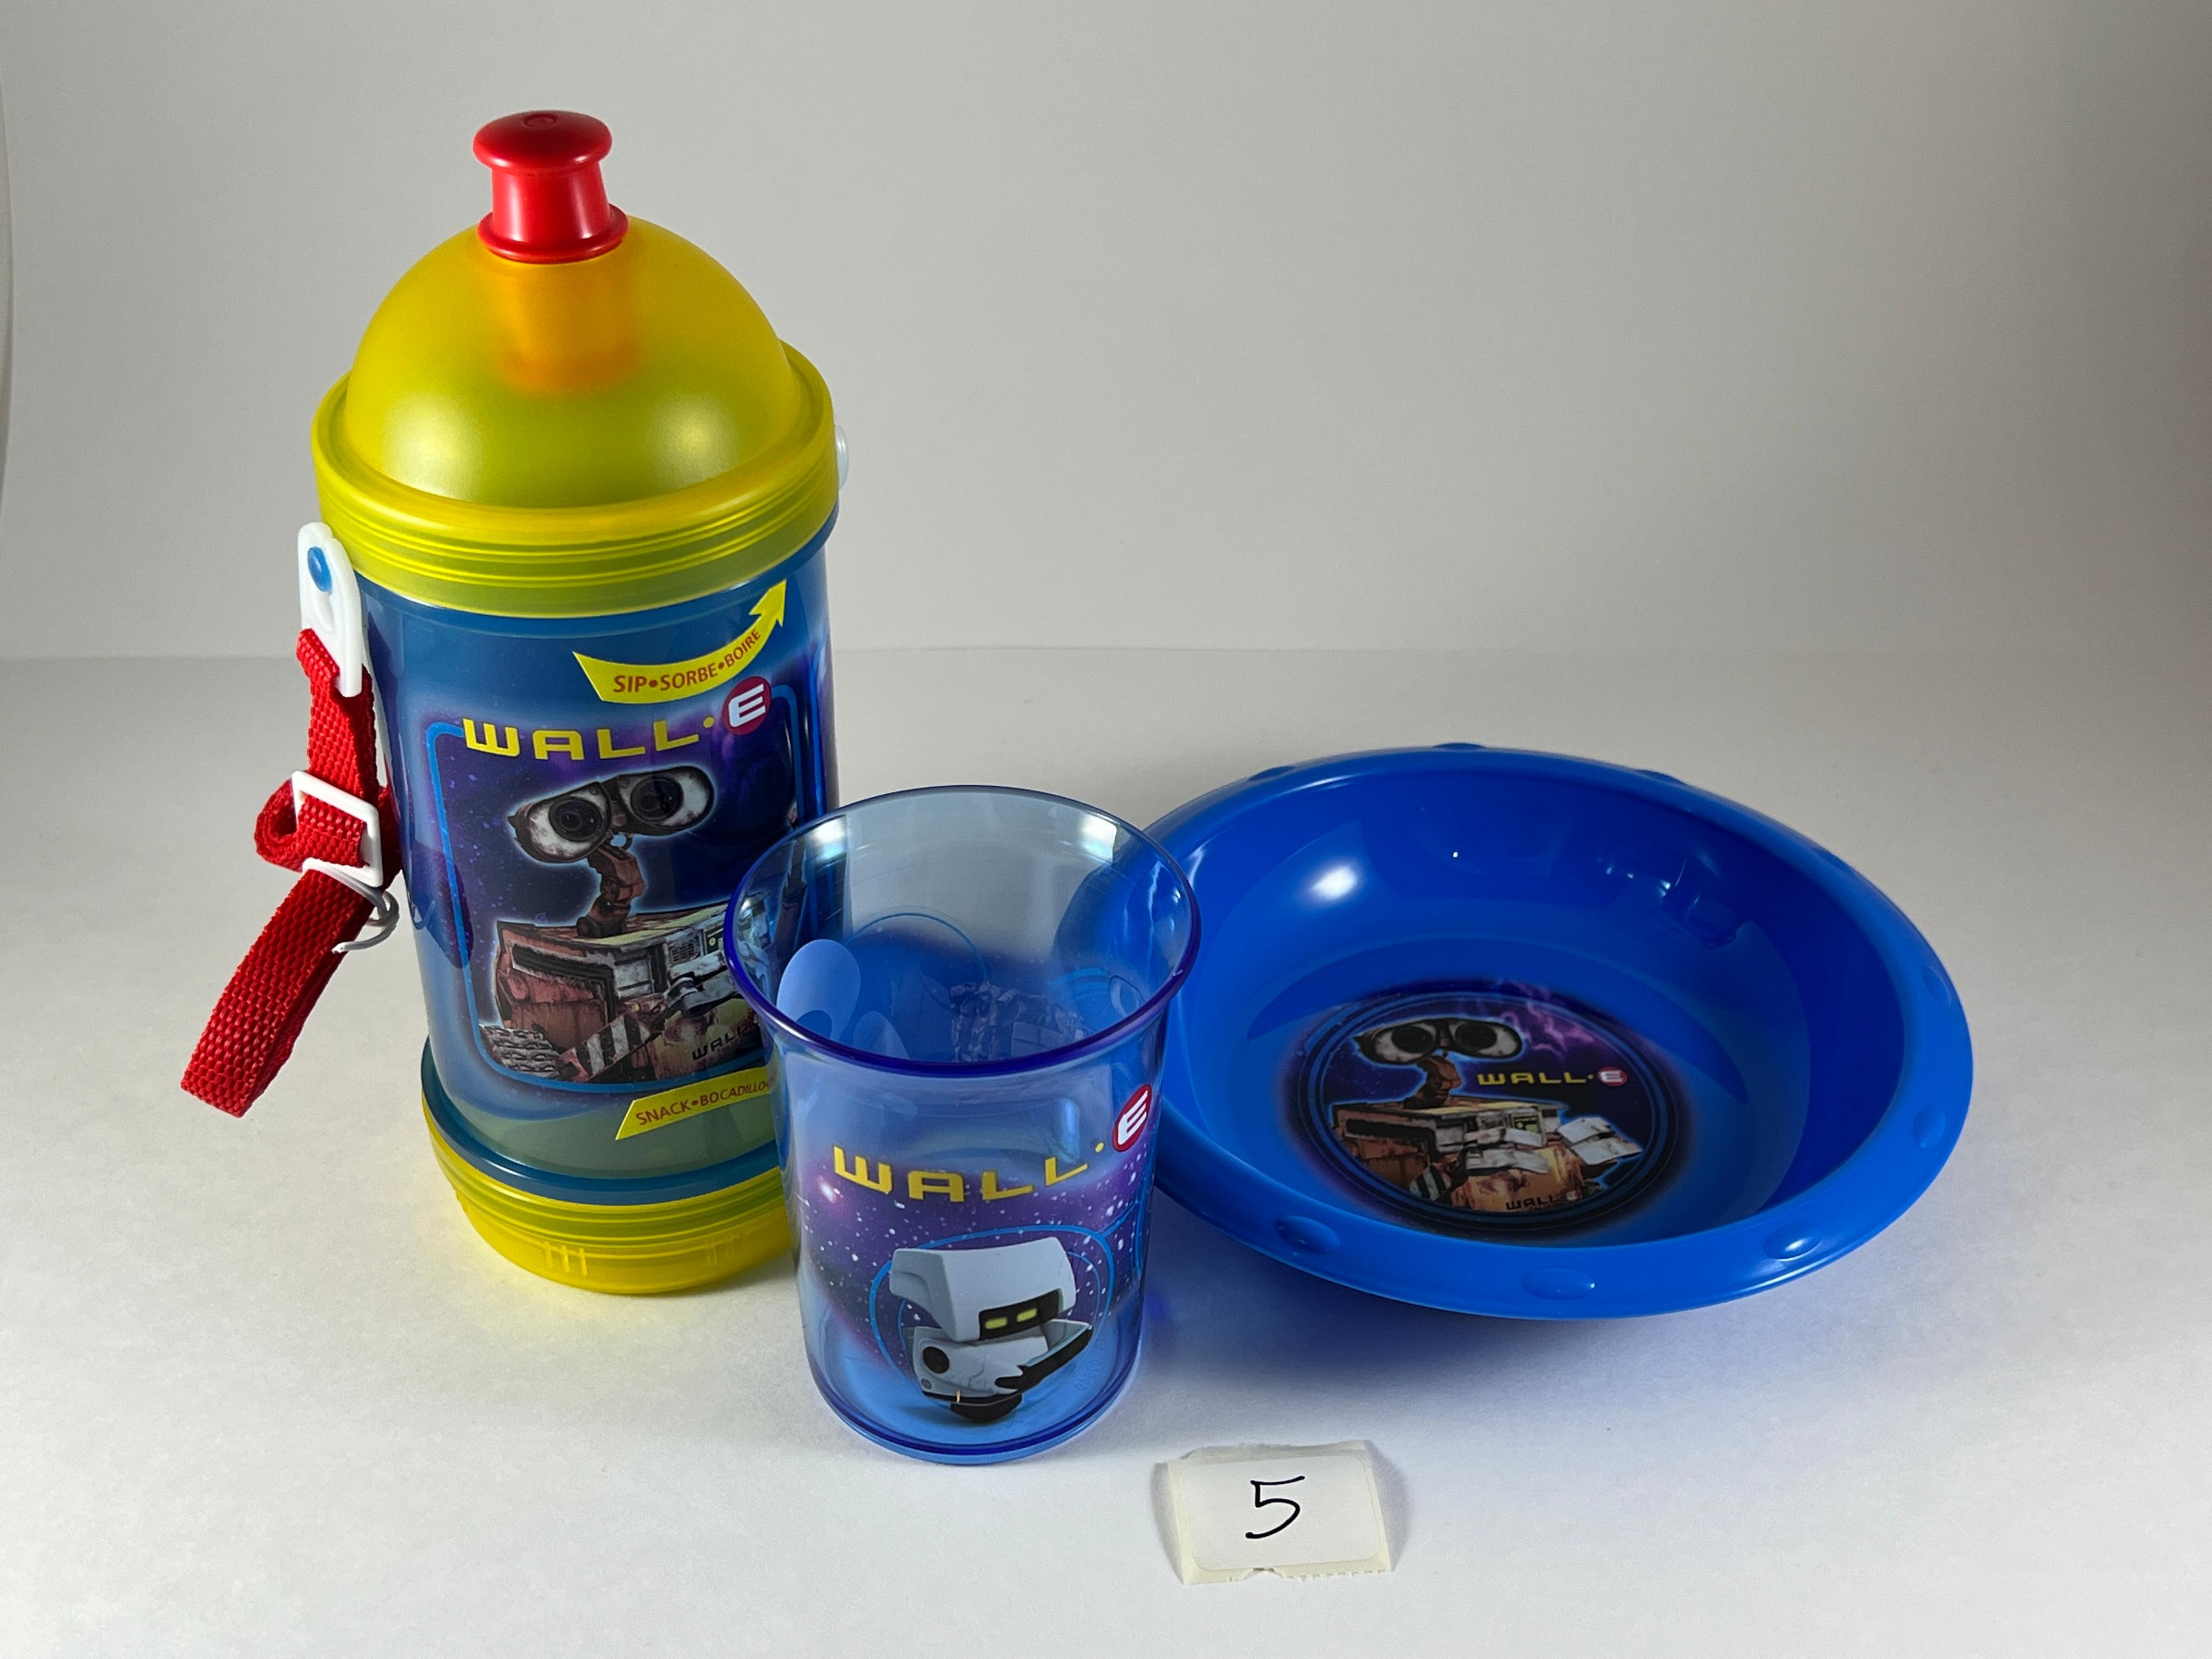 Wall-E plate and cups